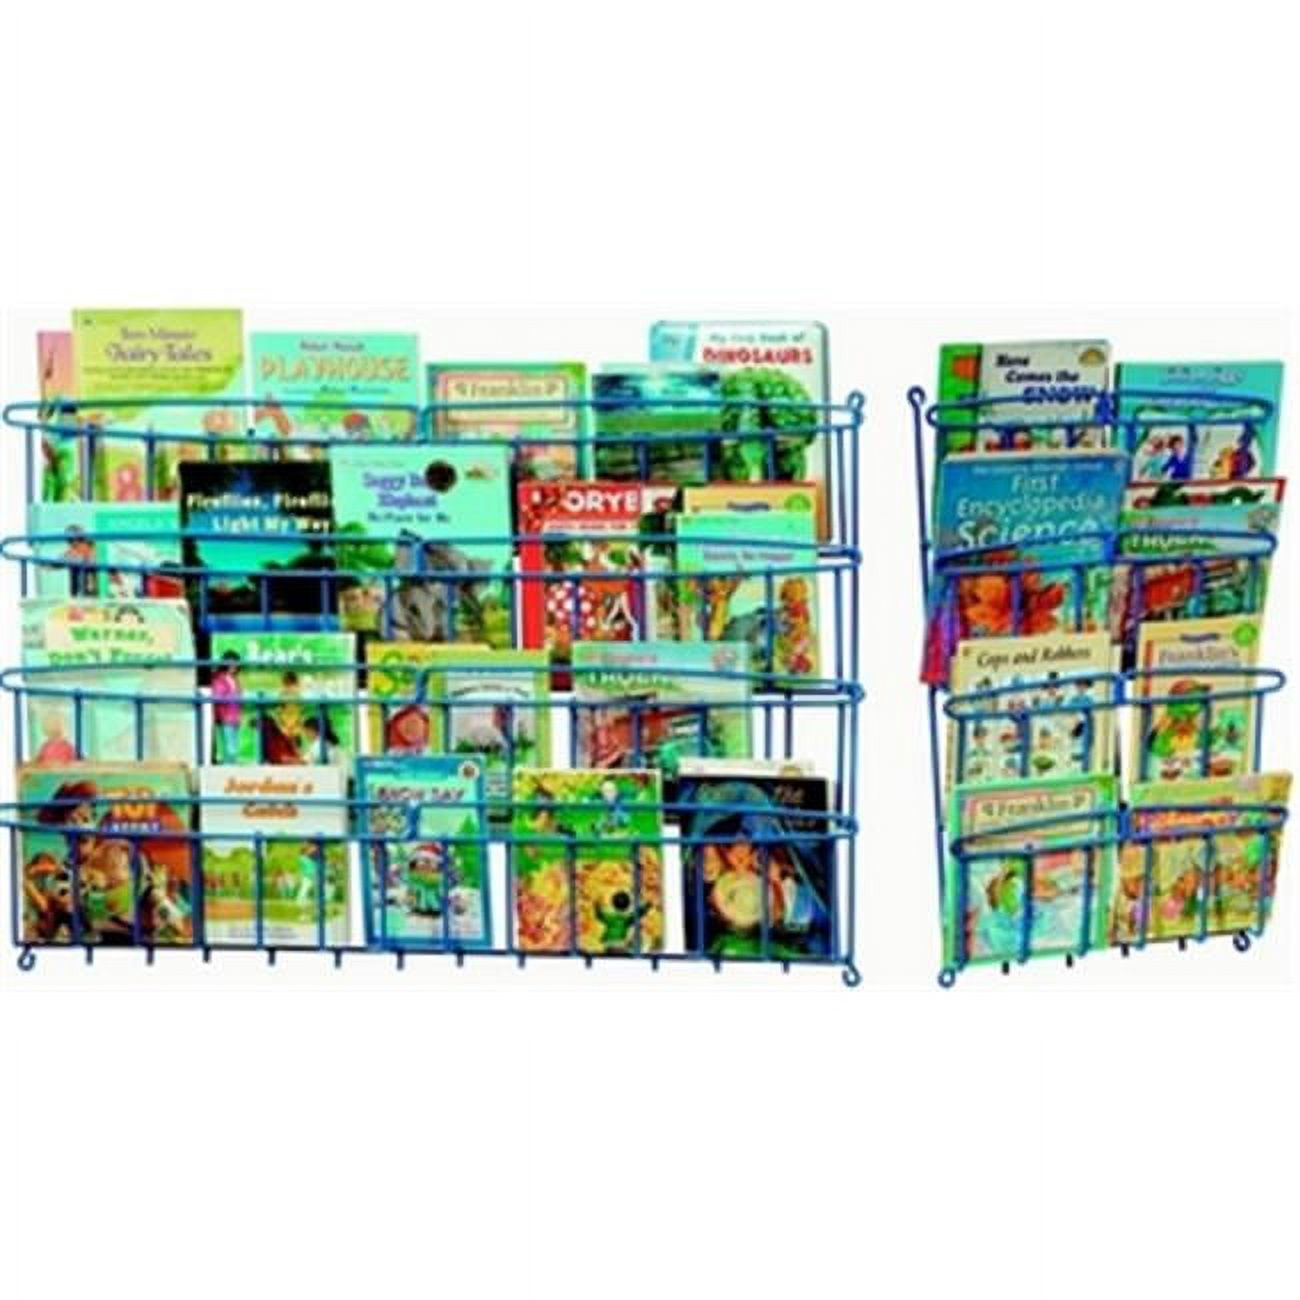 S Ac359kd Library Book Displayer Kit With Two Small & One Large Storage Unit